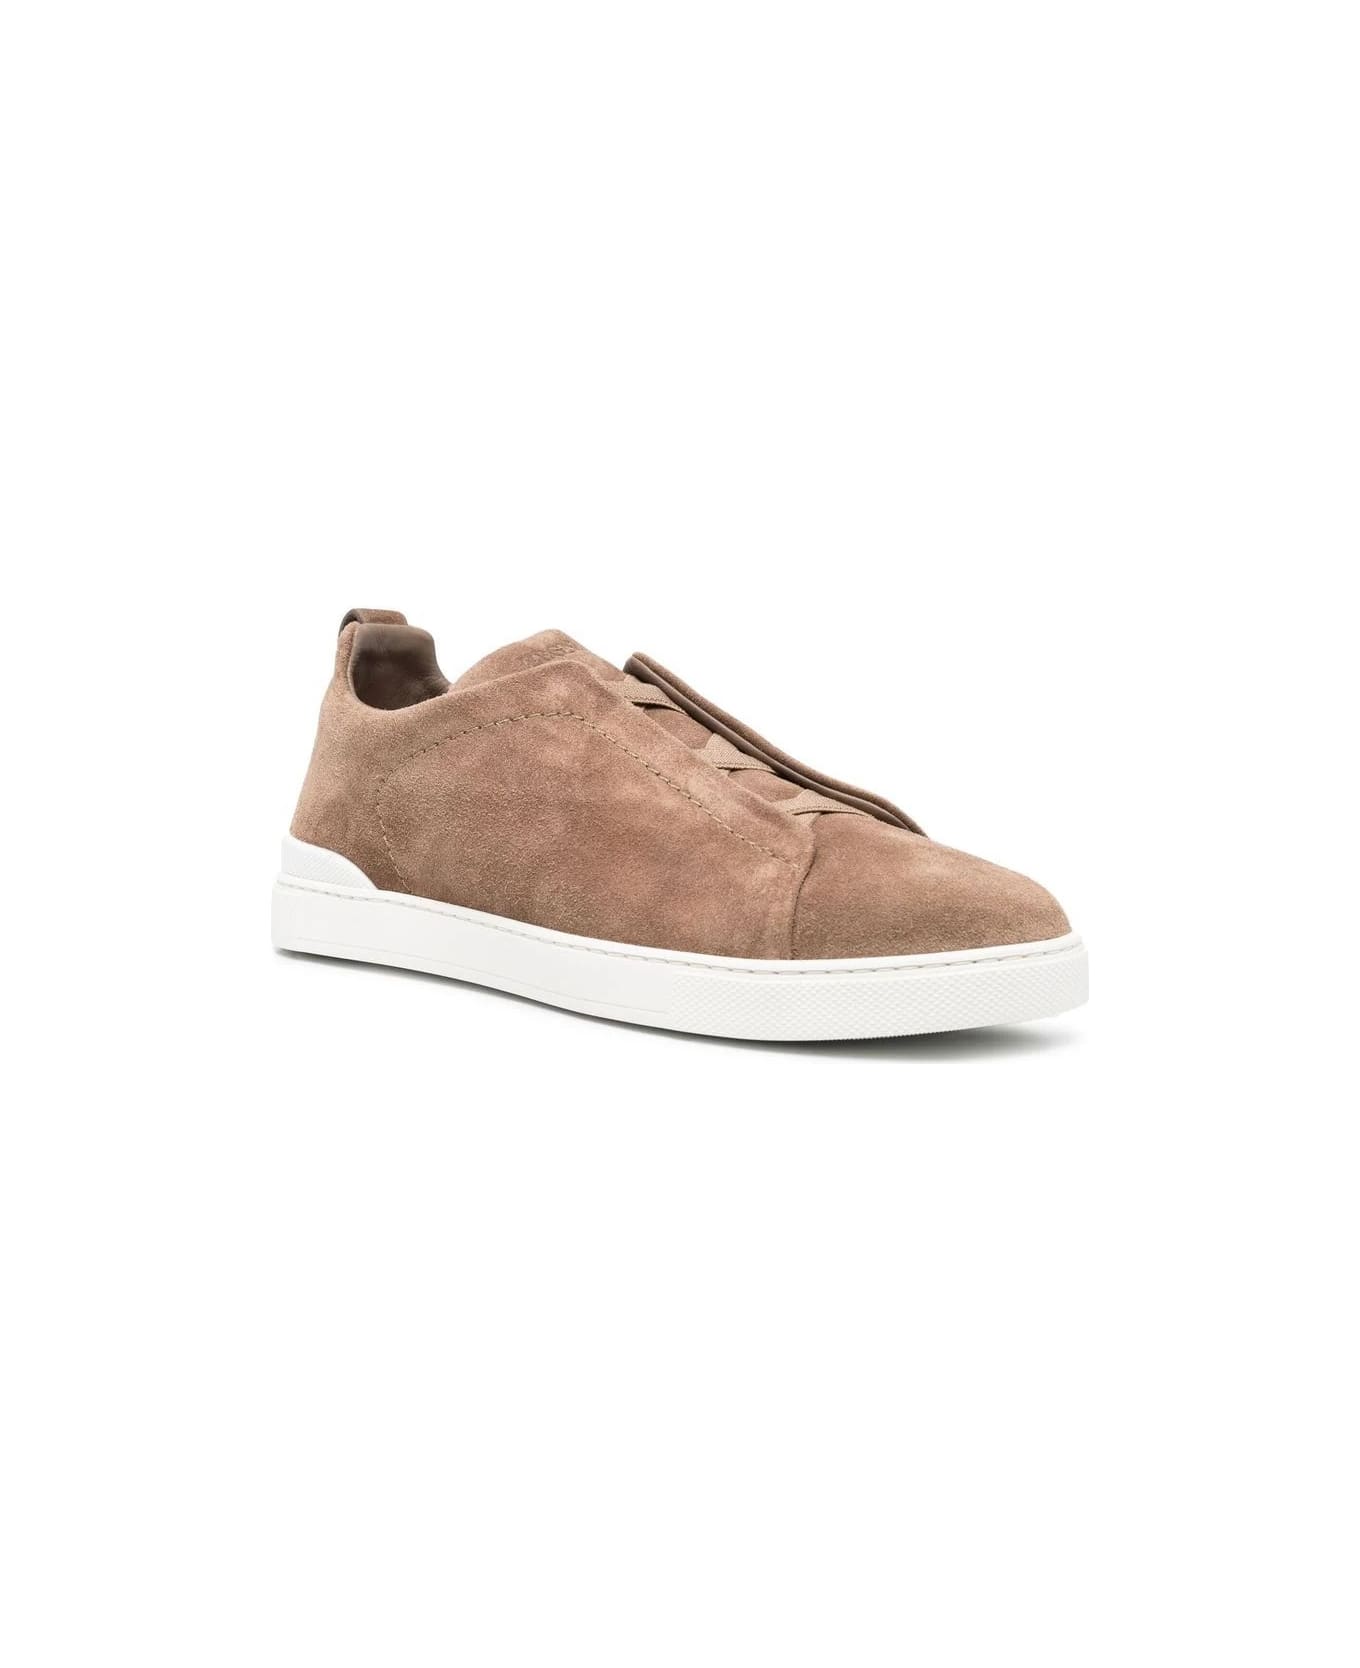 Zegna Triple Stitch Sneakers In Light Brown Suede - Brown